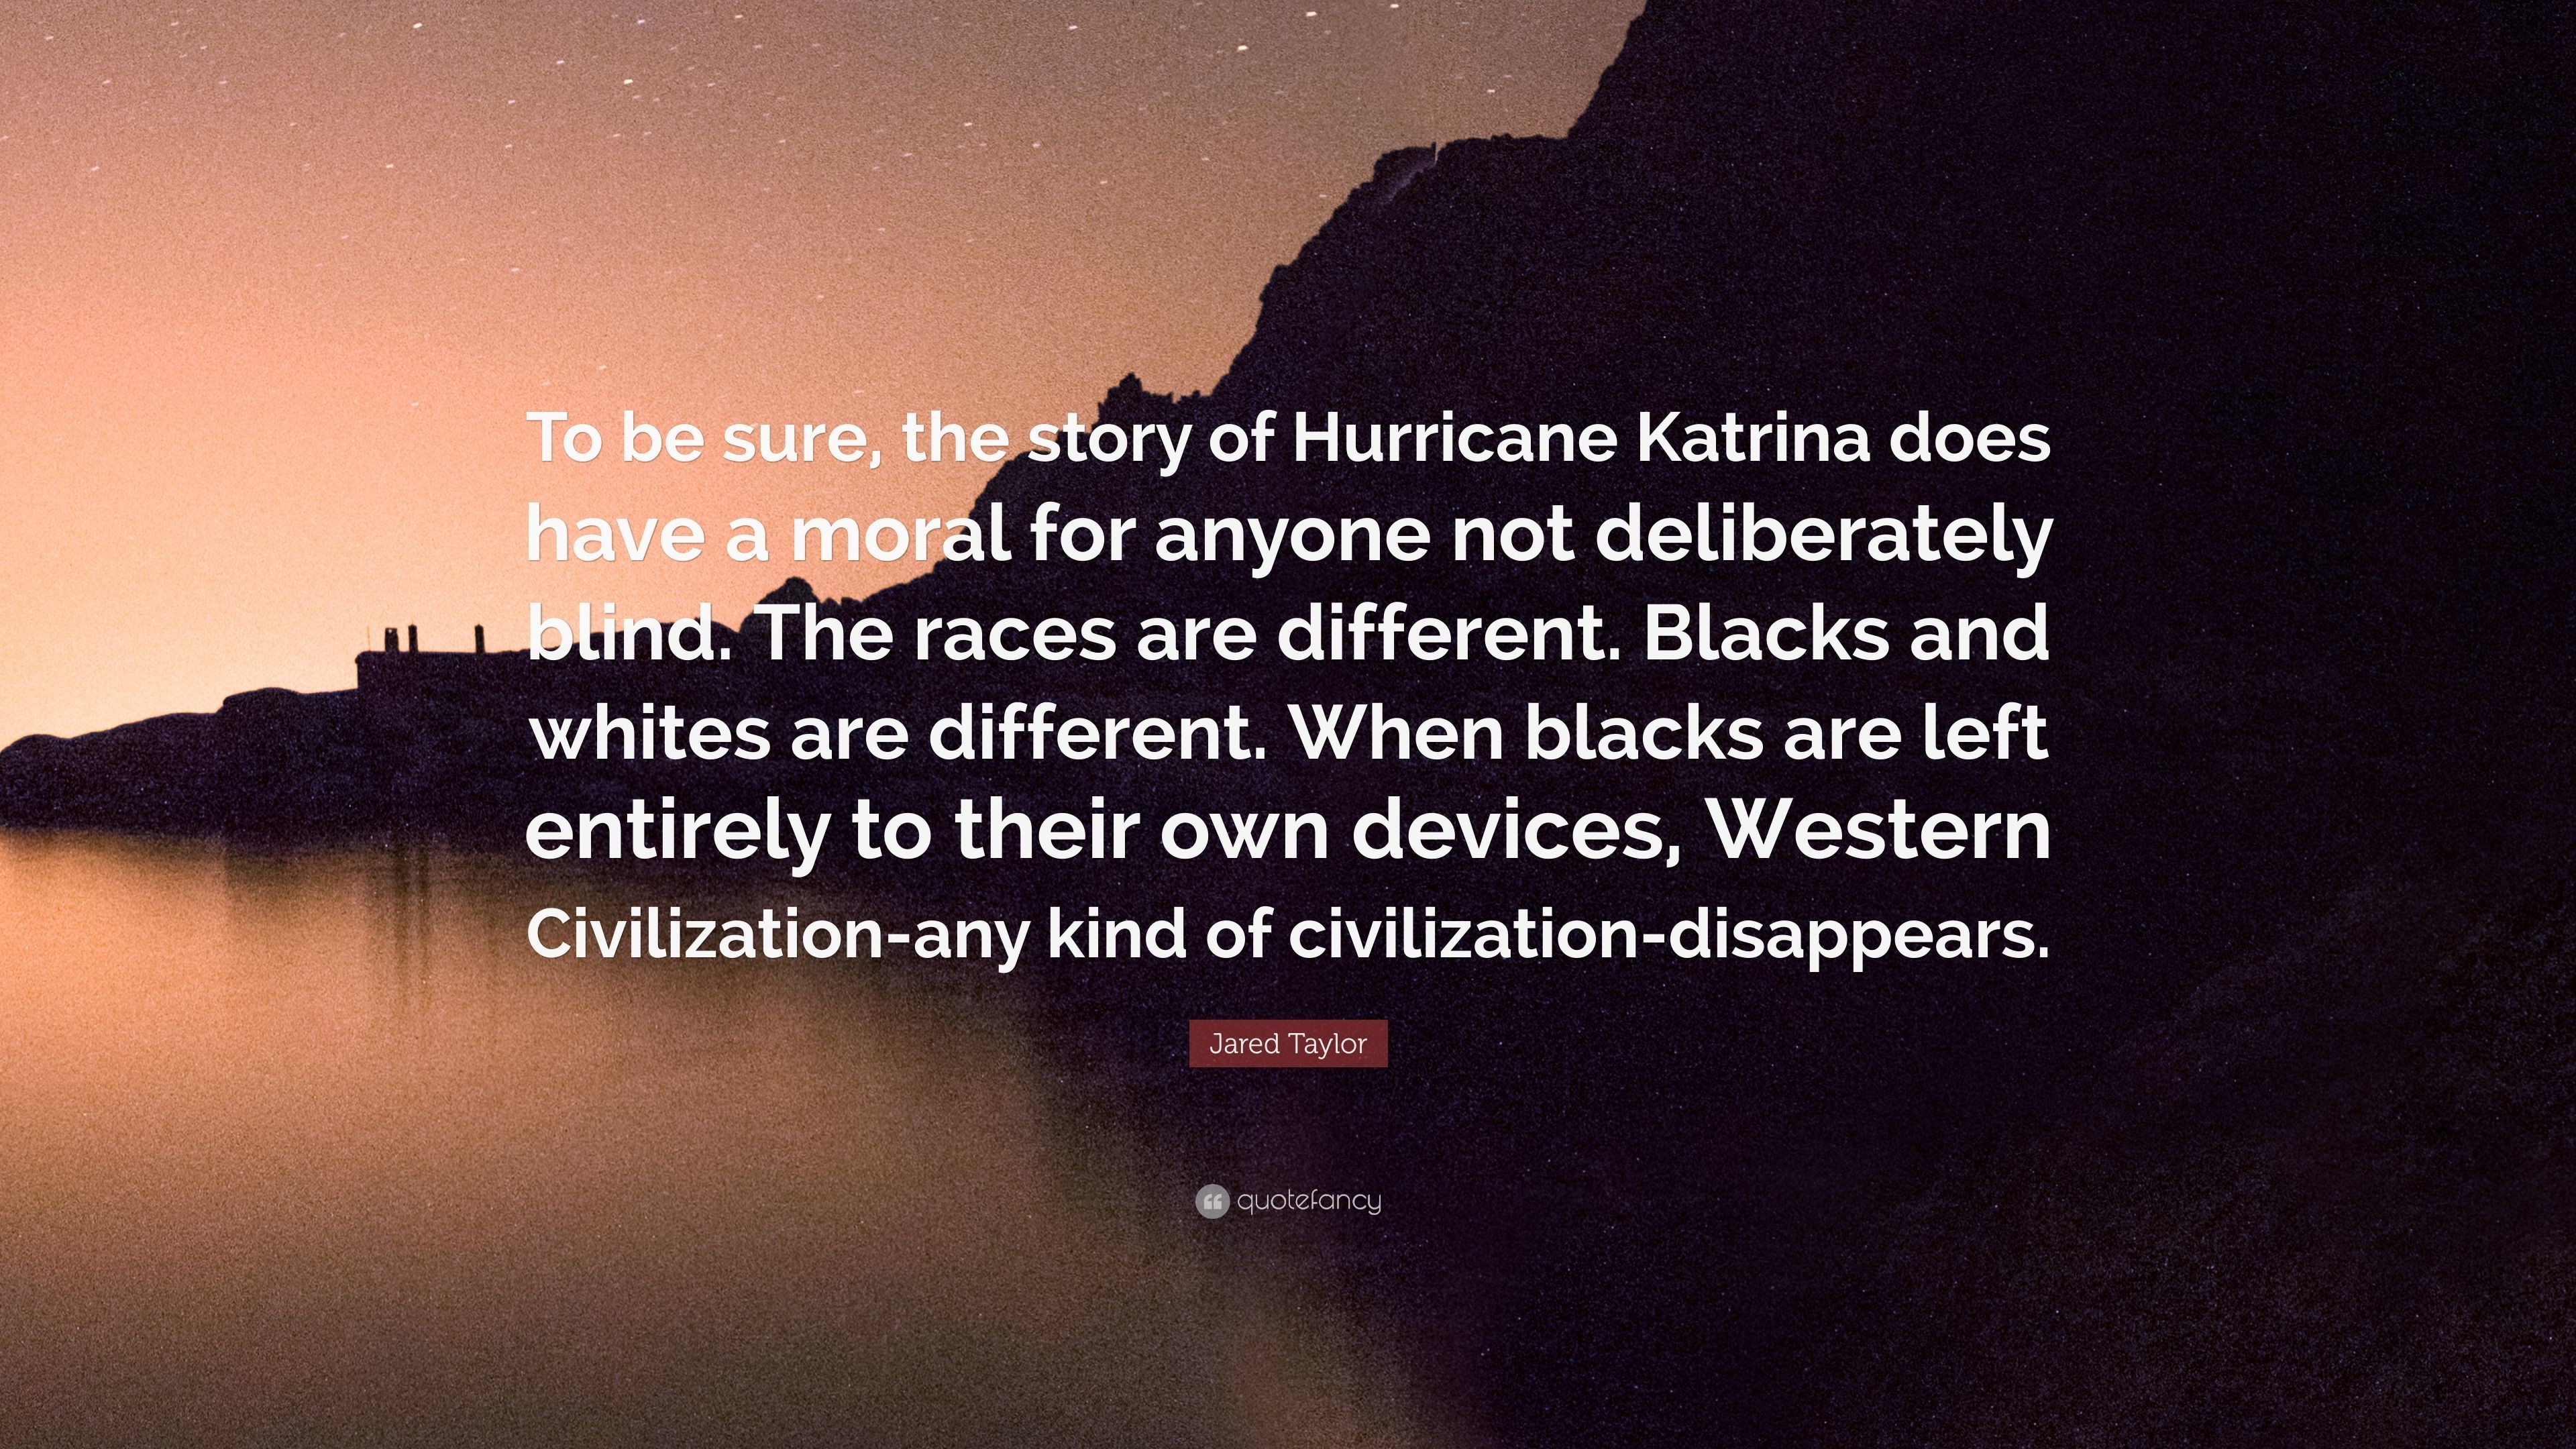 3840x2160 Jared Taylor Quote: “To be sure, the story of Hurricane Katrina does have